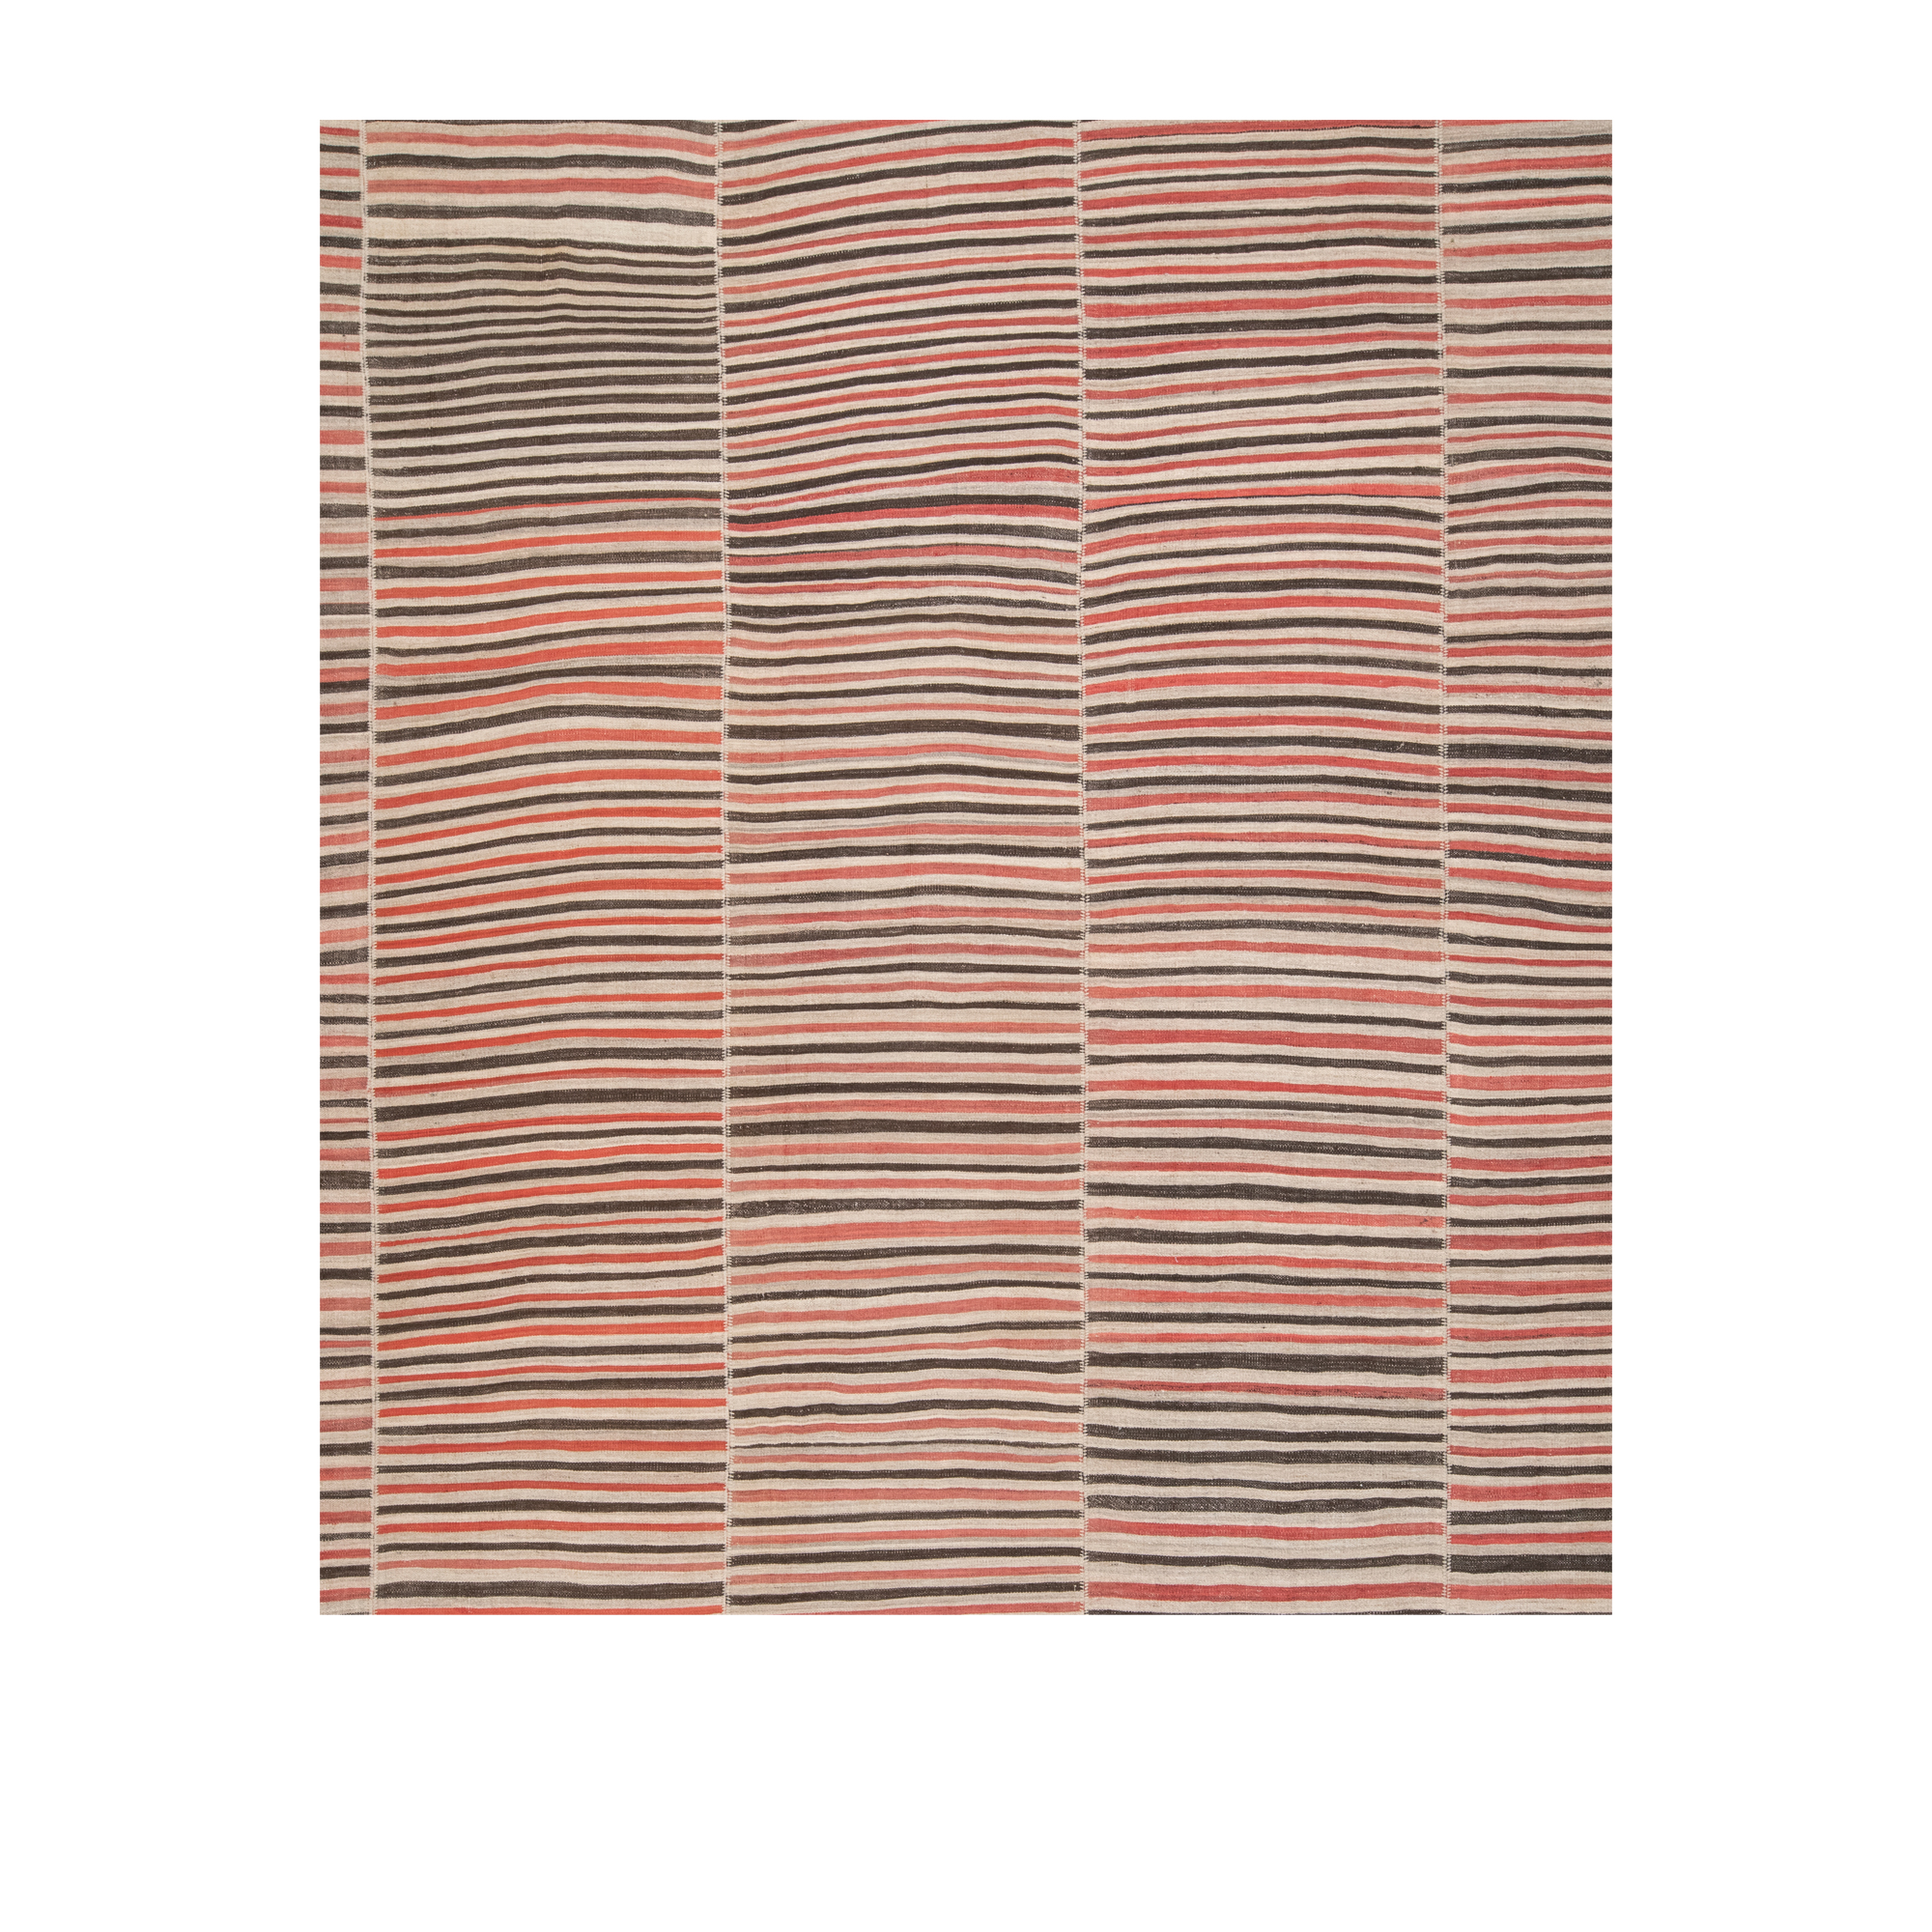 This Mazandaran rug inspired by the kilims that were woven by Persian women in the Mazandaran Province. 